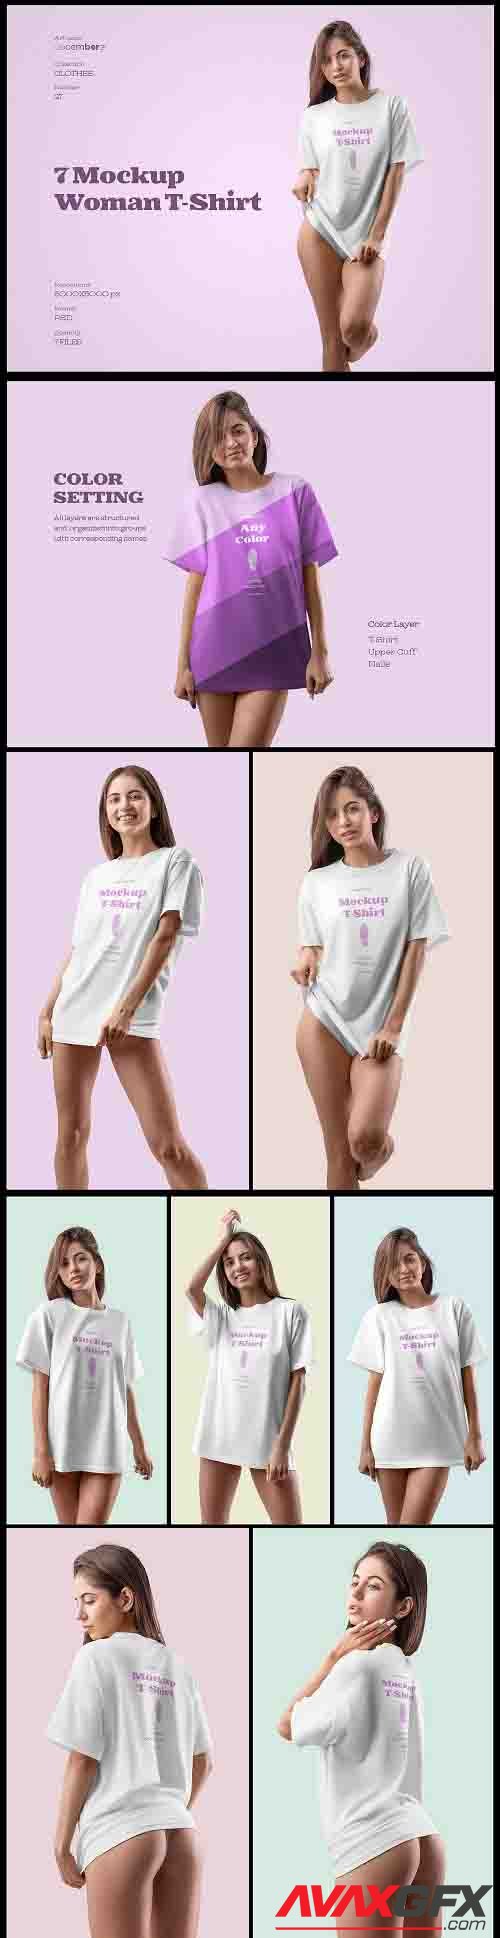 Download 7 Mockups Woman T-Shirt Oversize » AVAXGFX - All Downloads that You Need in One Place! Graphic ...